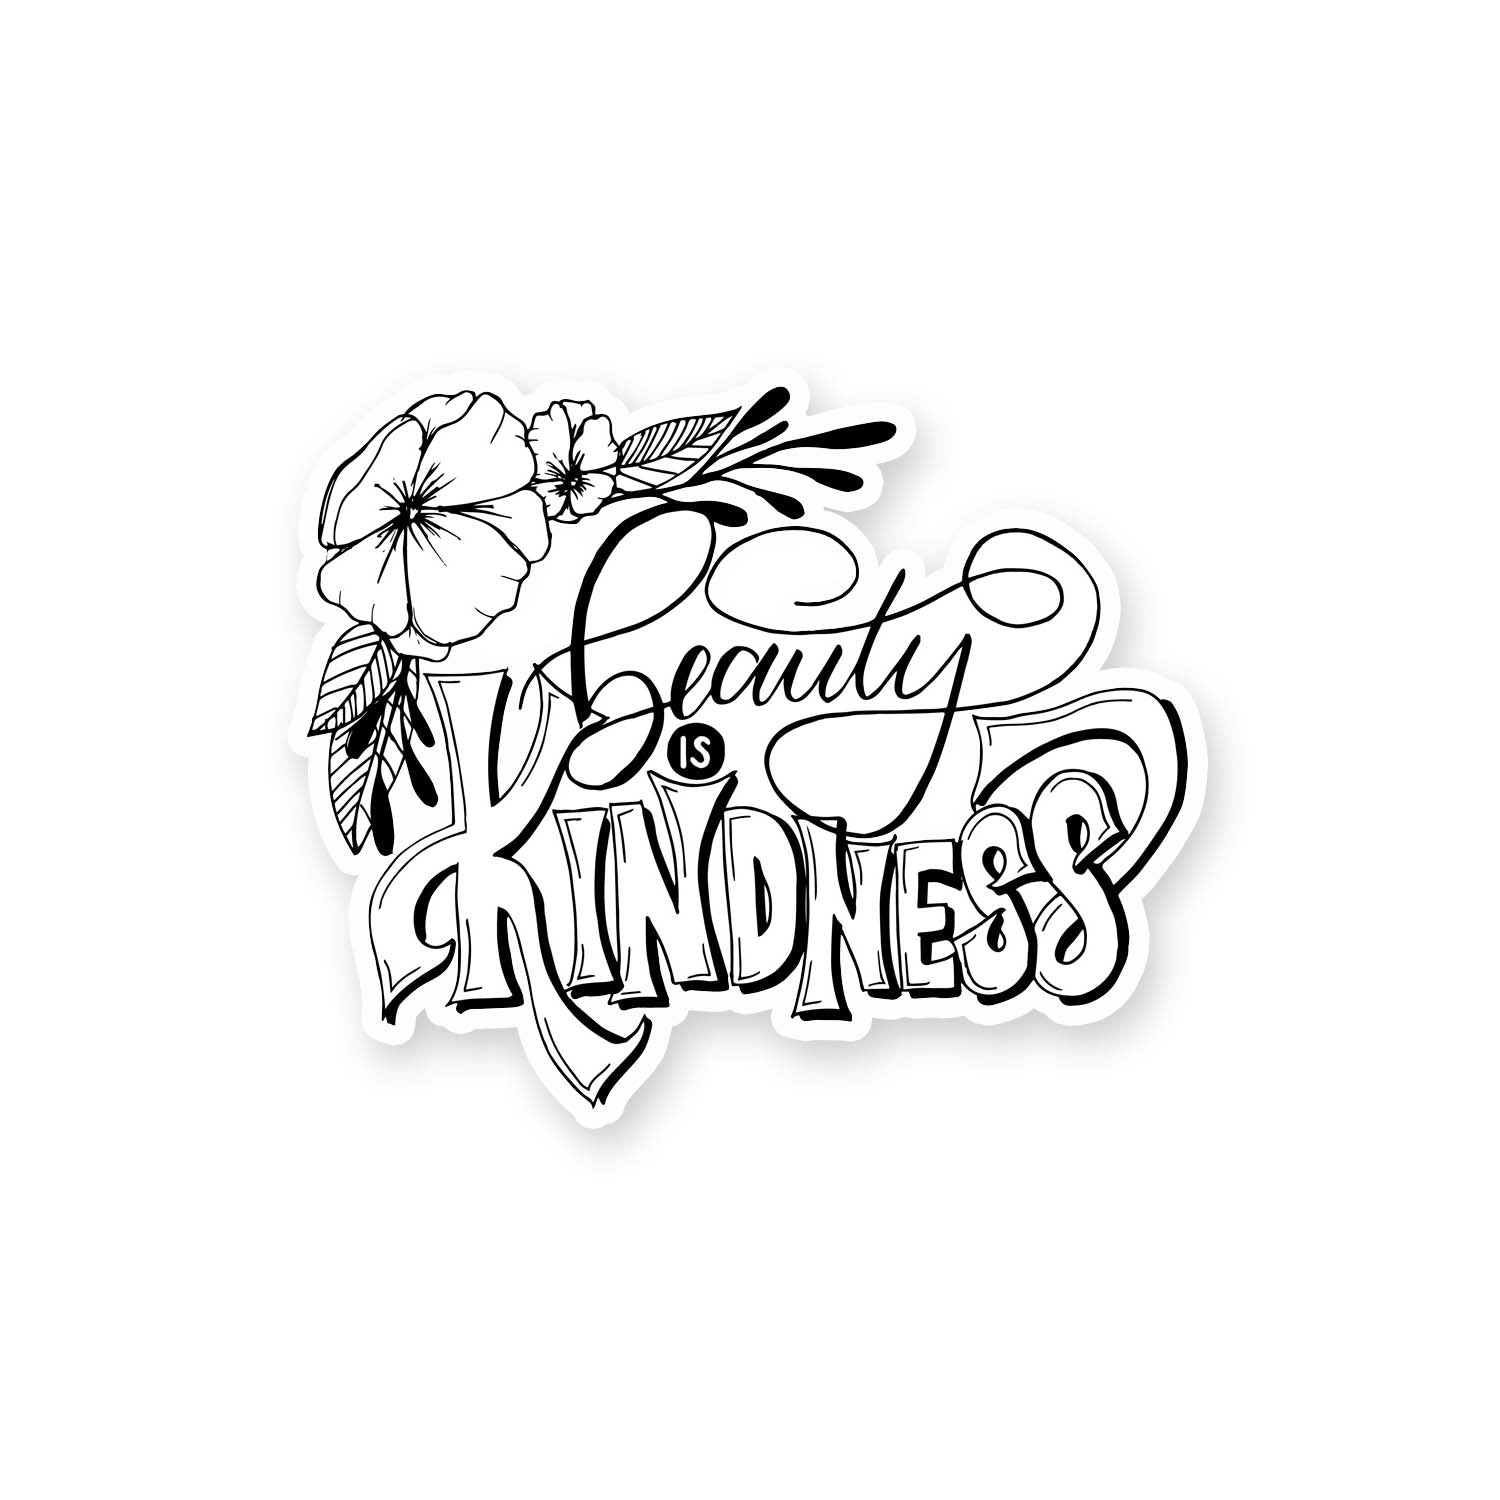 Hand lettered illustrated 3" vinyl sticker that says beauty is kindness with floral illustration in black and white